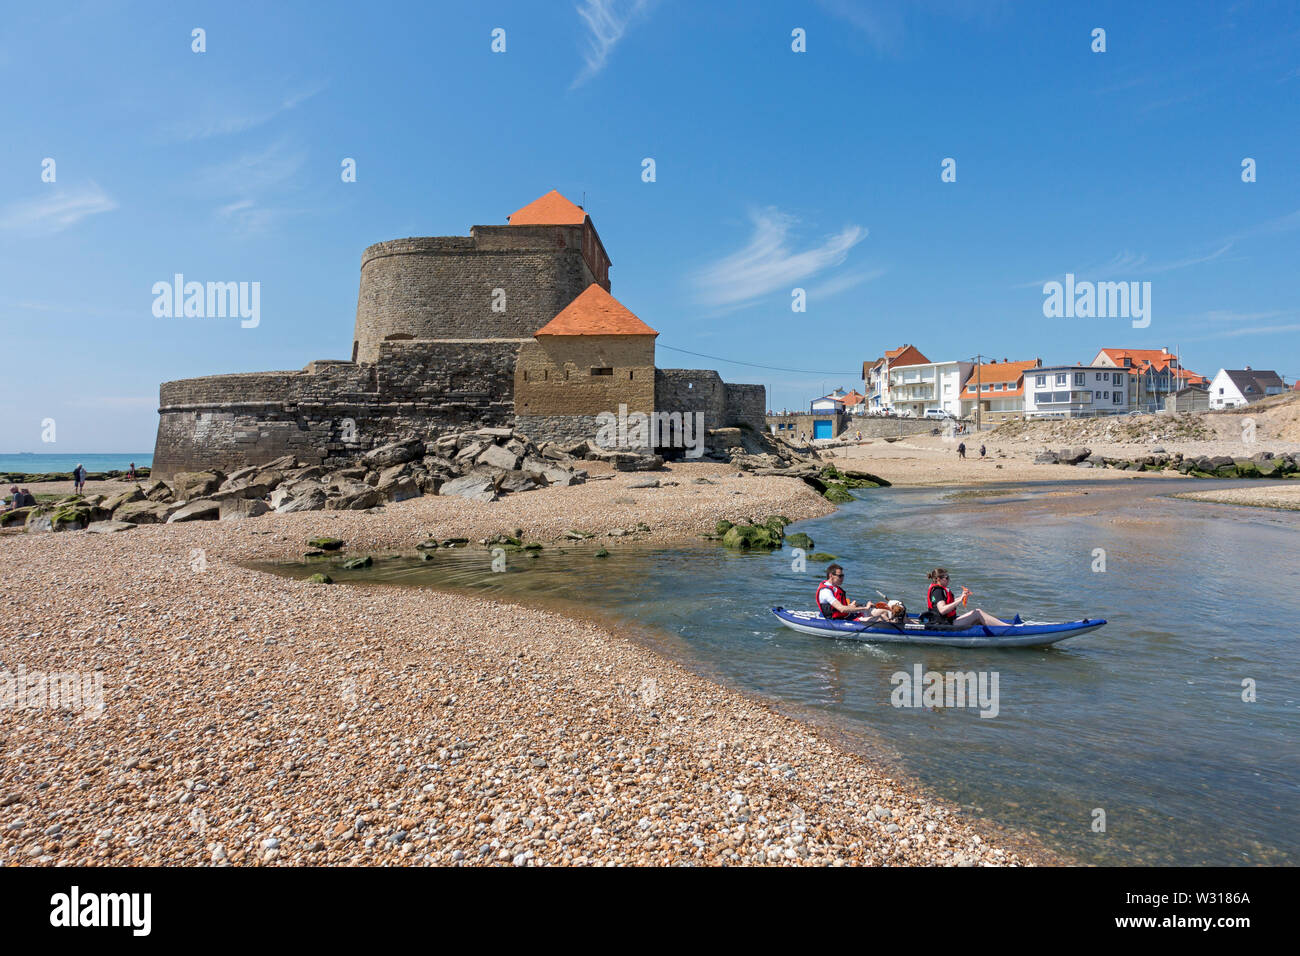 Tourists in kayak in front of Fort Mahon and shingle beach at Ambleteuse along rocky North Sea coast, Côte d'Opale / Opal Coast, France Stock Photo